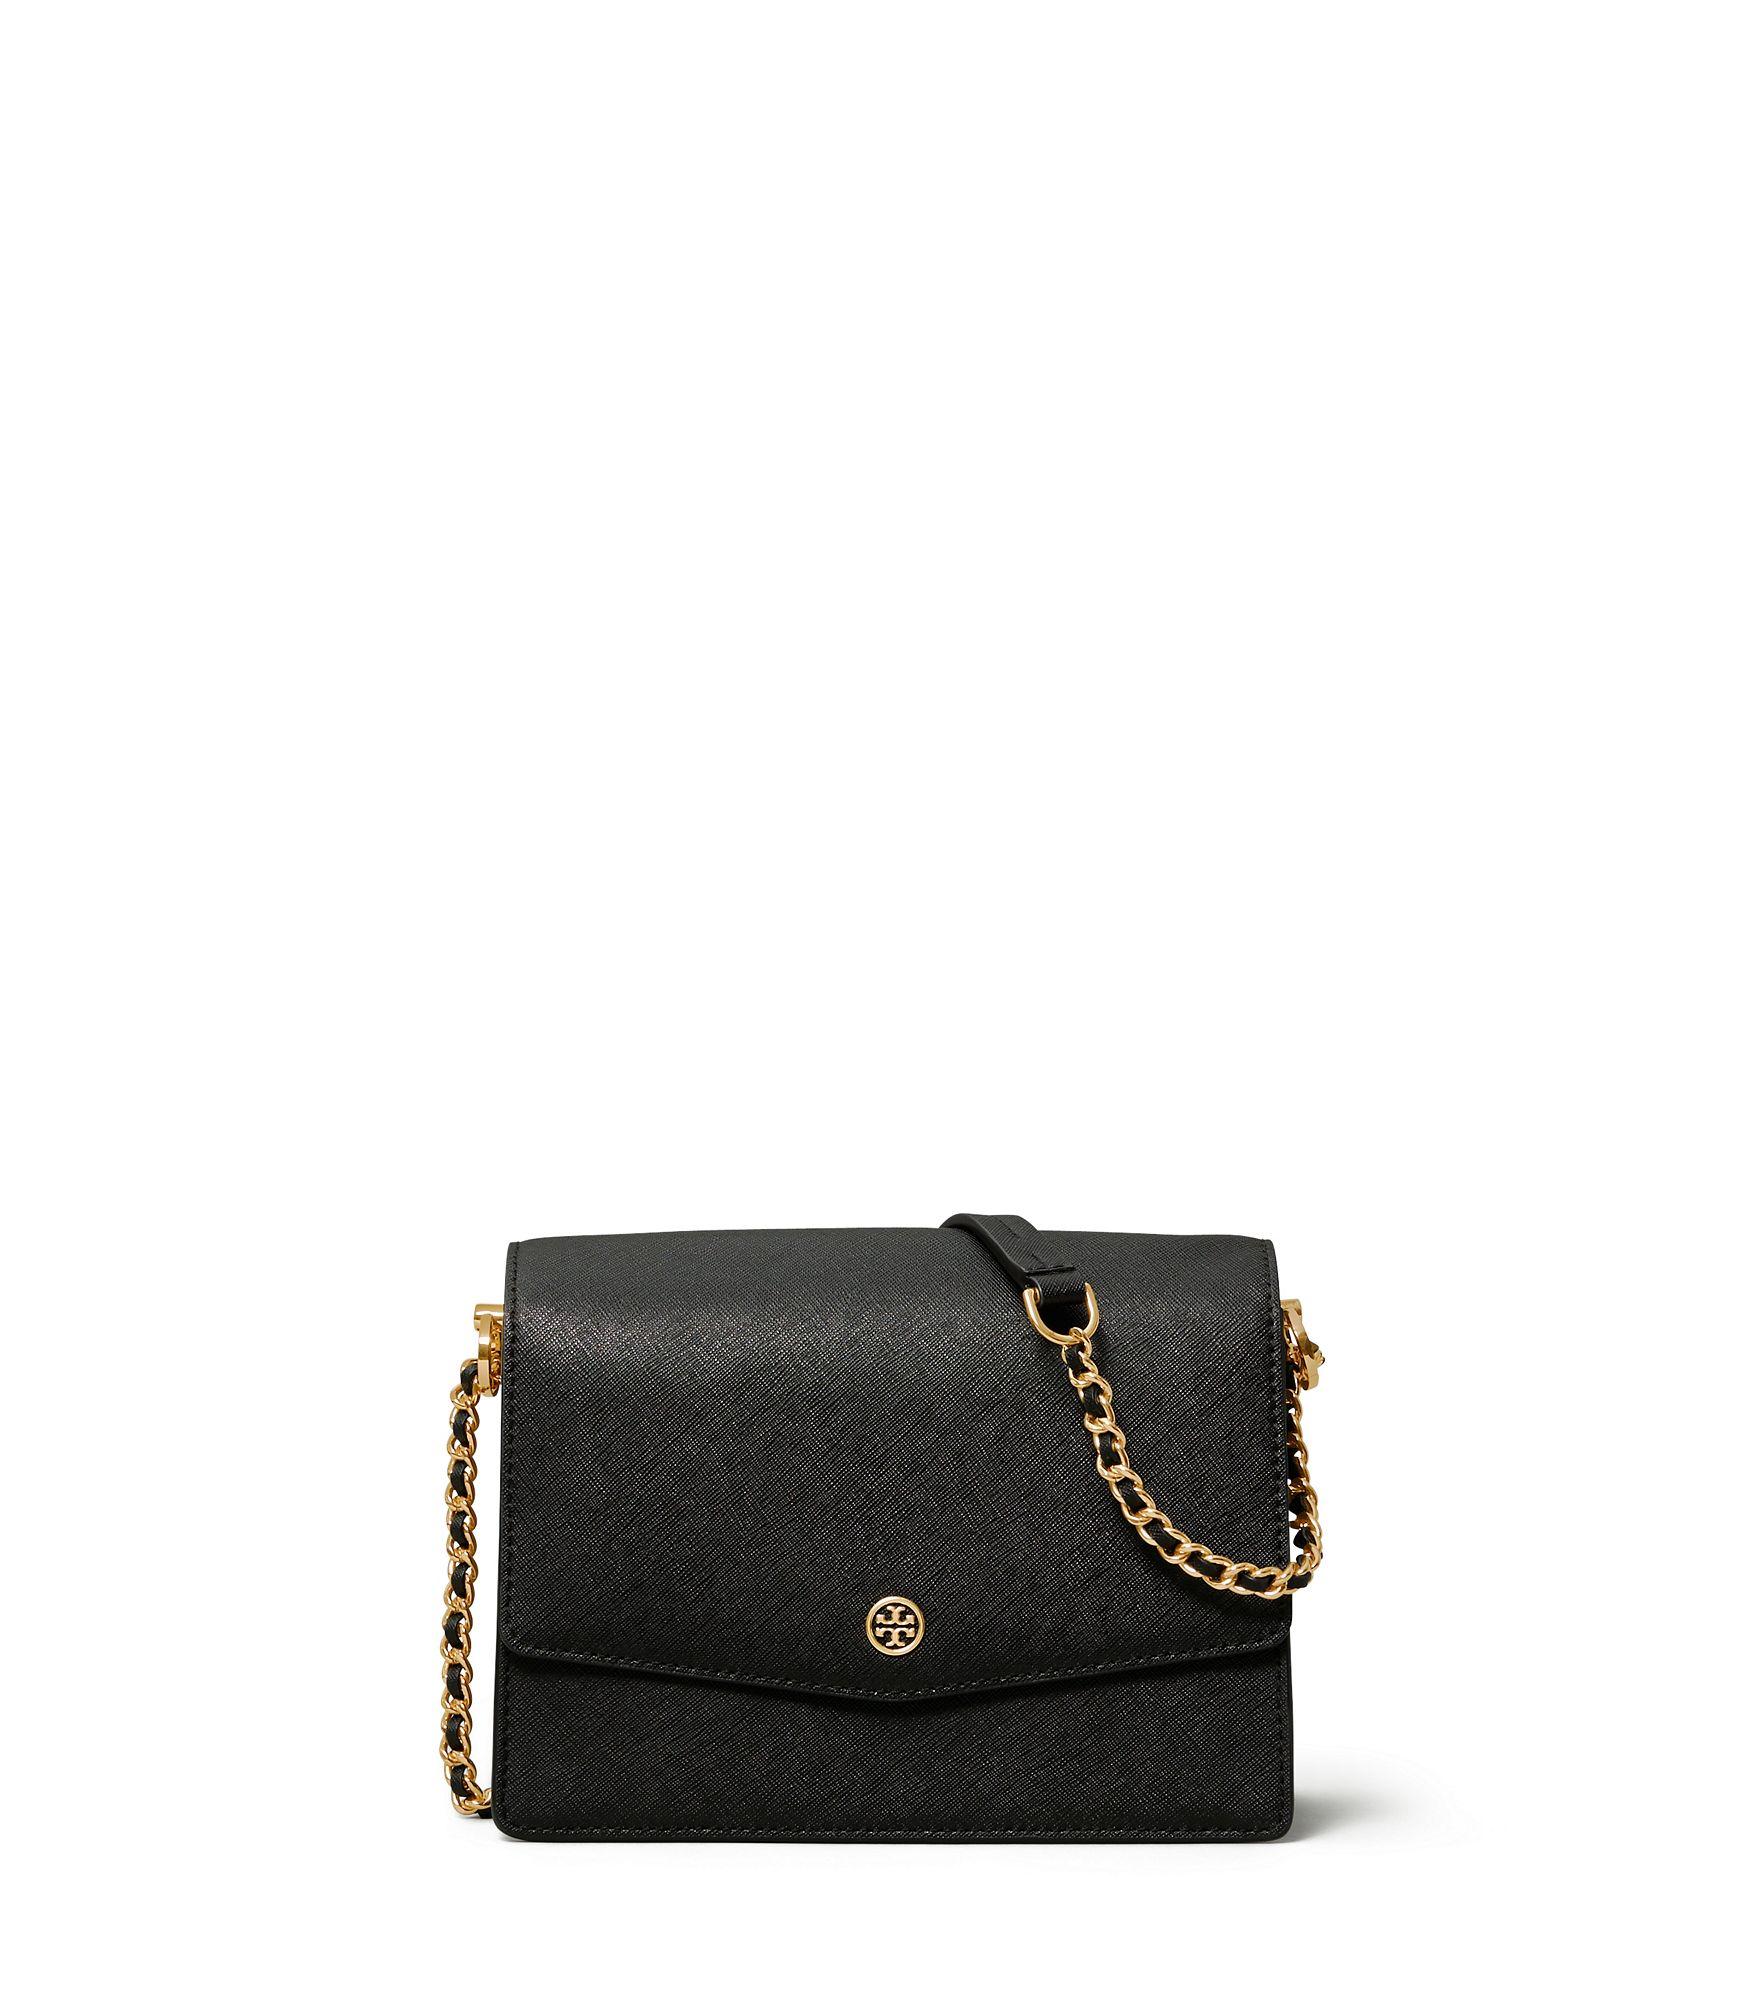 Tory Burch Leather Robinson Convertible Shoulder Bag in Black - Lyst